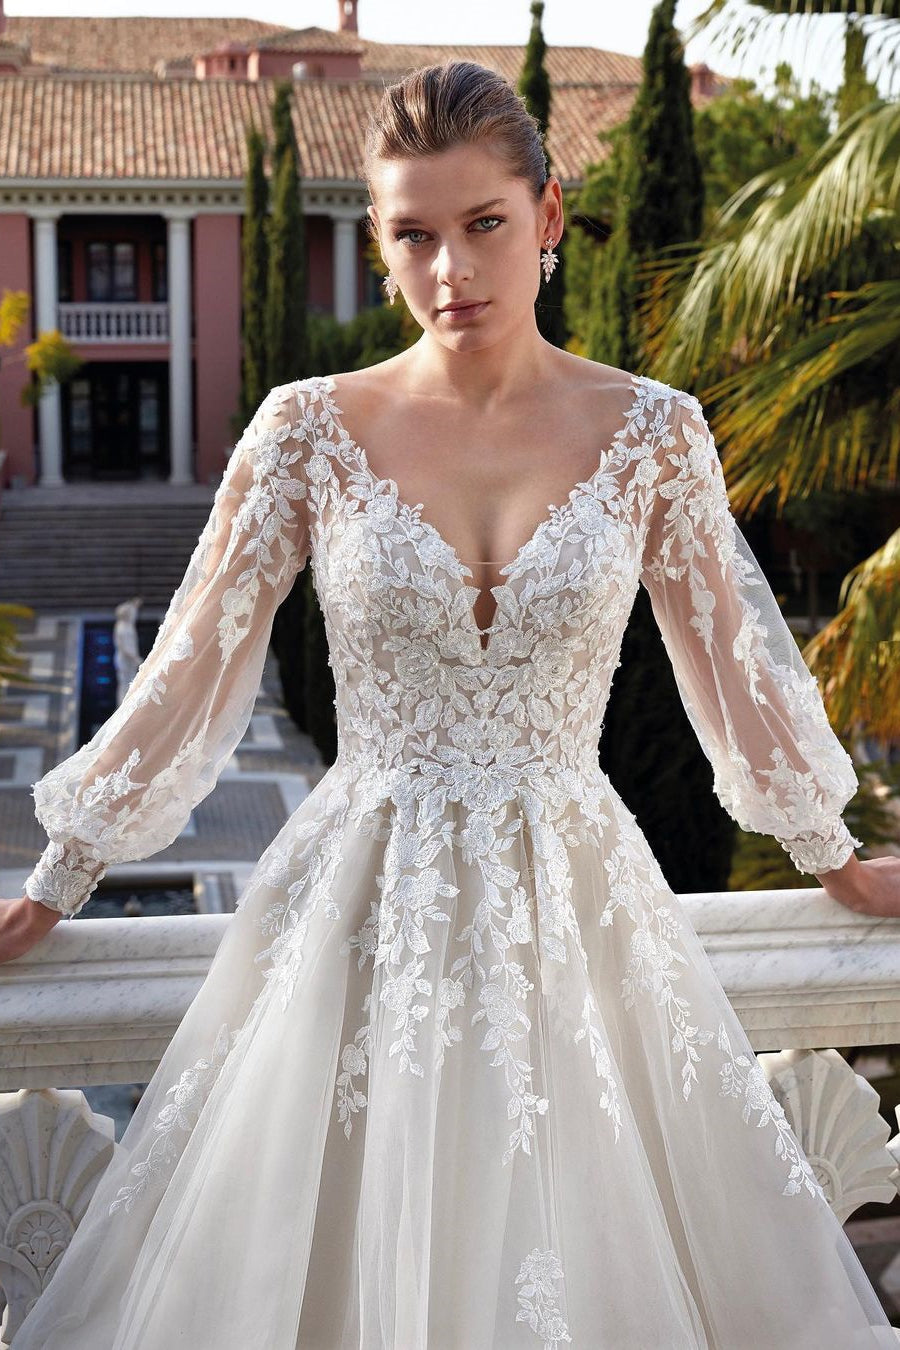 Amazing V-neck Backless Long Sleeves A-line Appliques Wedding Dress ...